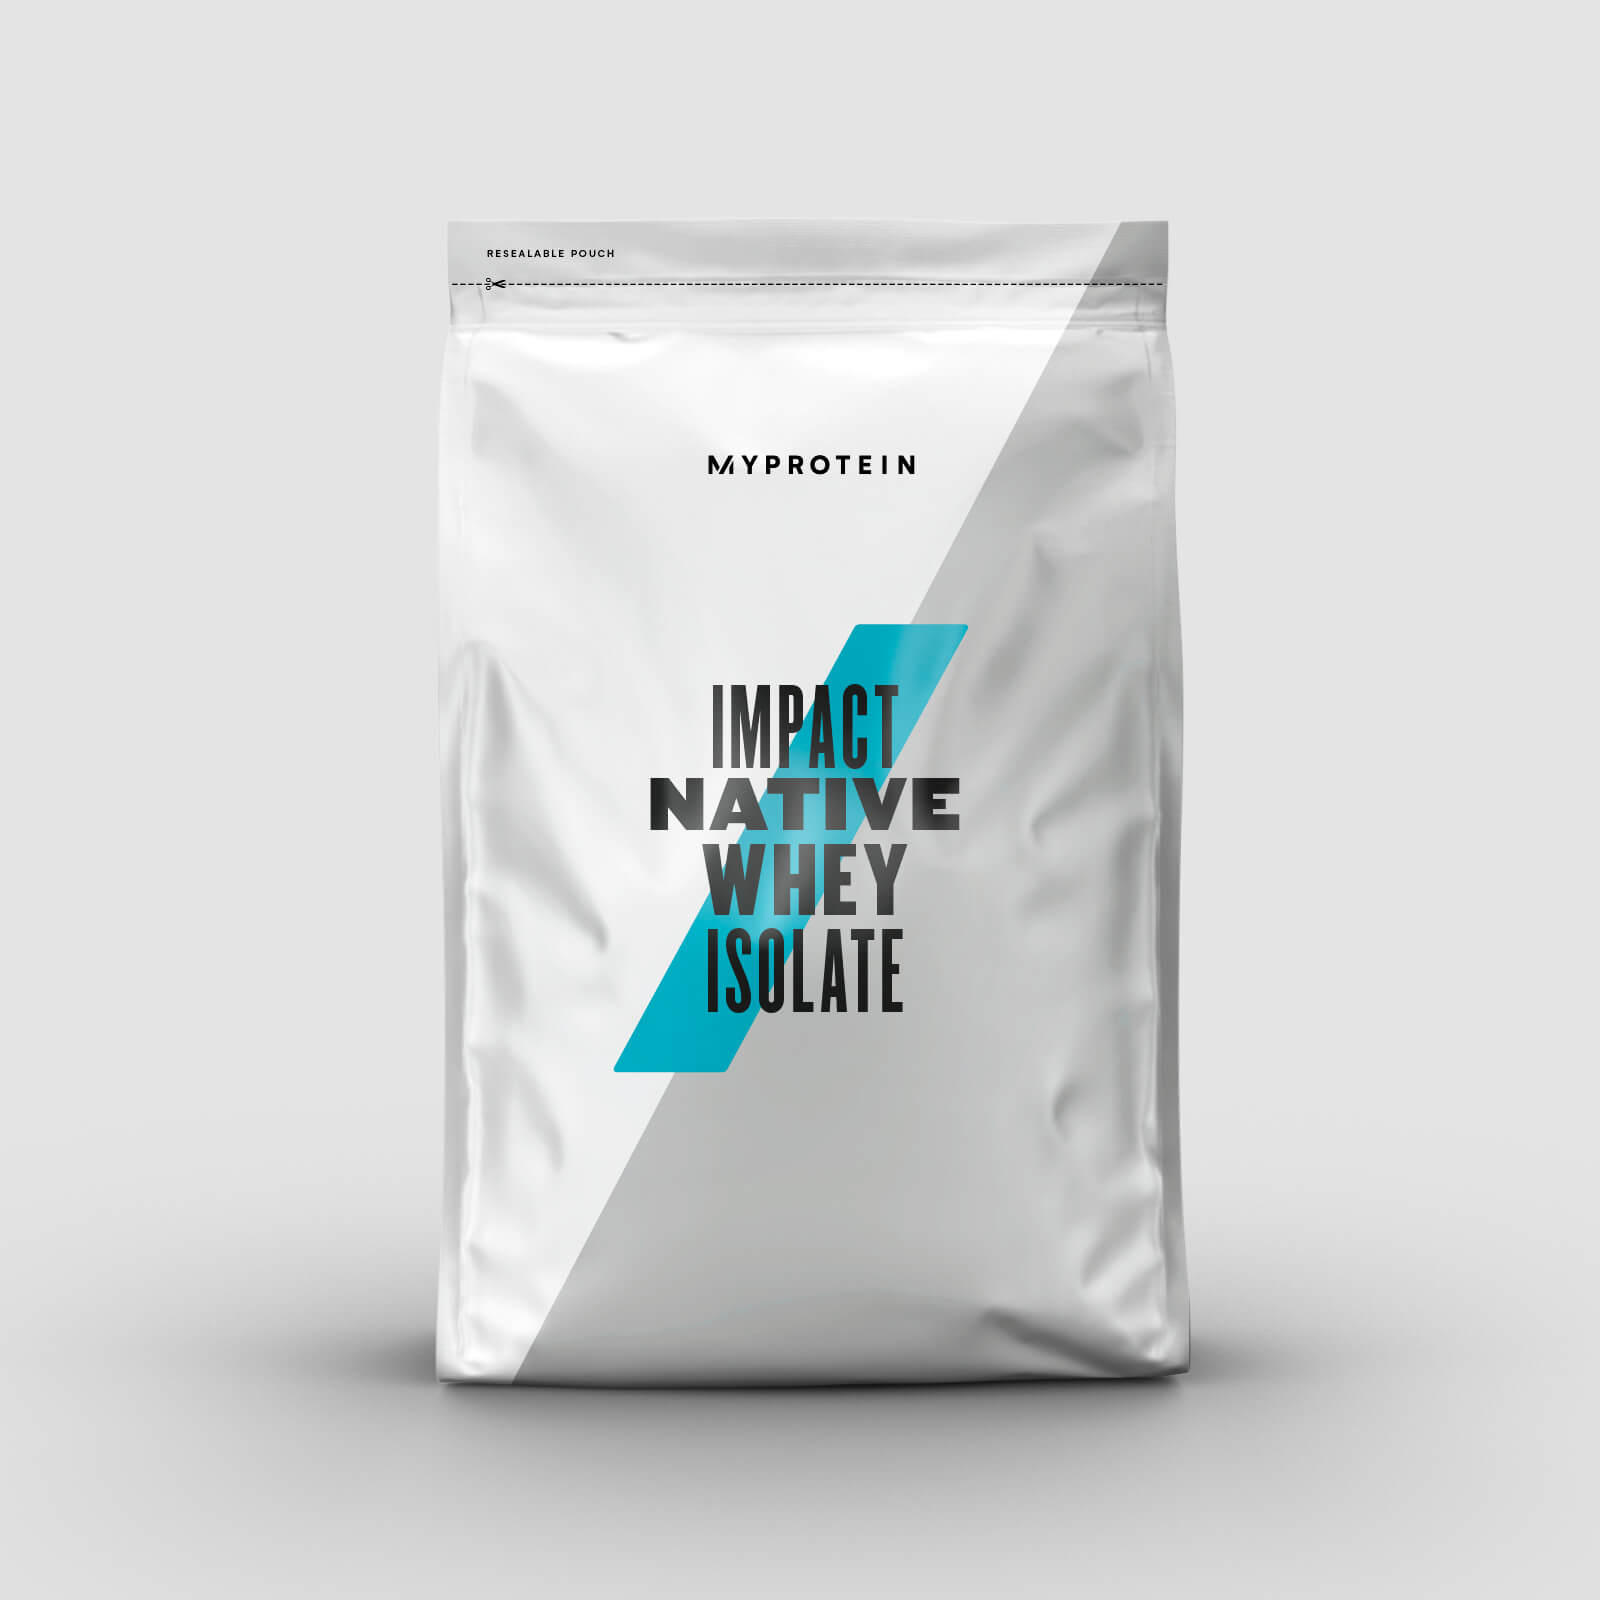 Myprotein Impact Native Whey Isolate - 1kg - Natural Chocolate